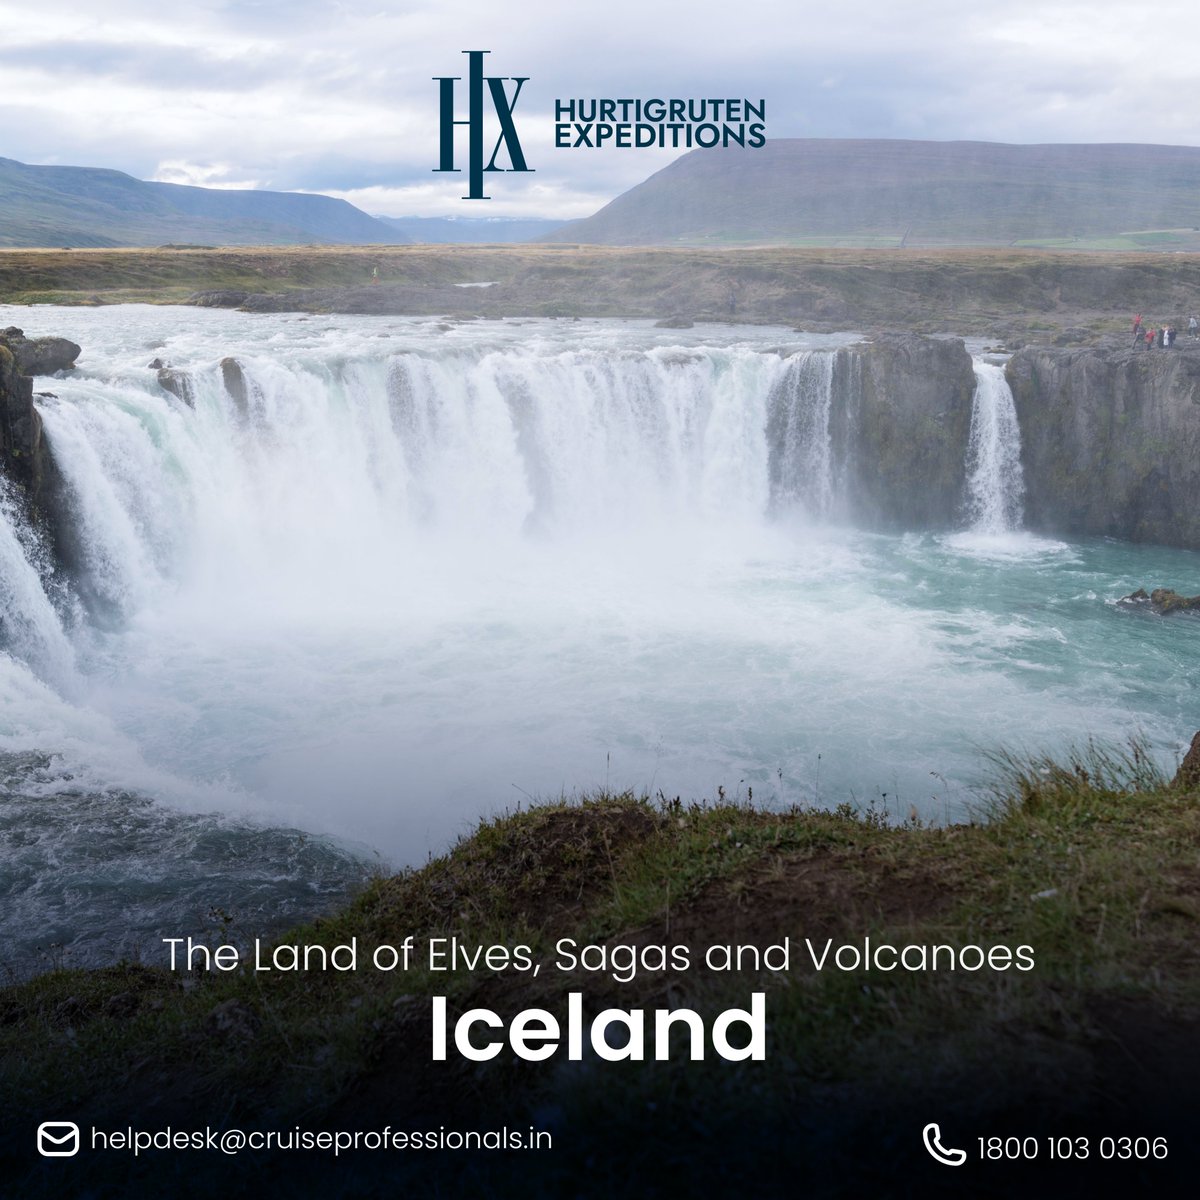 Discover Iceland's starkly beautiful, volcanic scenery – with active volcanoes, geysers, glaciers, mountains and waterfalls.

#hurtigrutenexpeditions #cruiseprofessionals #cruise #cruiselife #explore #explorepage #travel #iceland #expeditioncruising